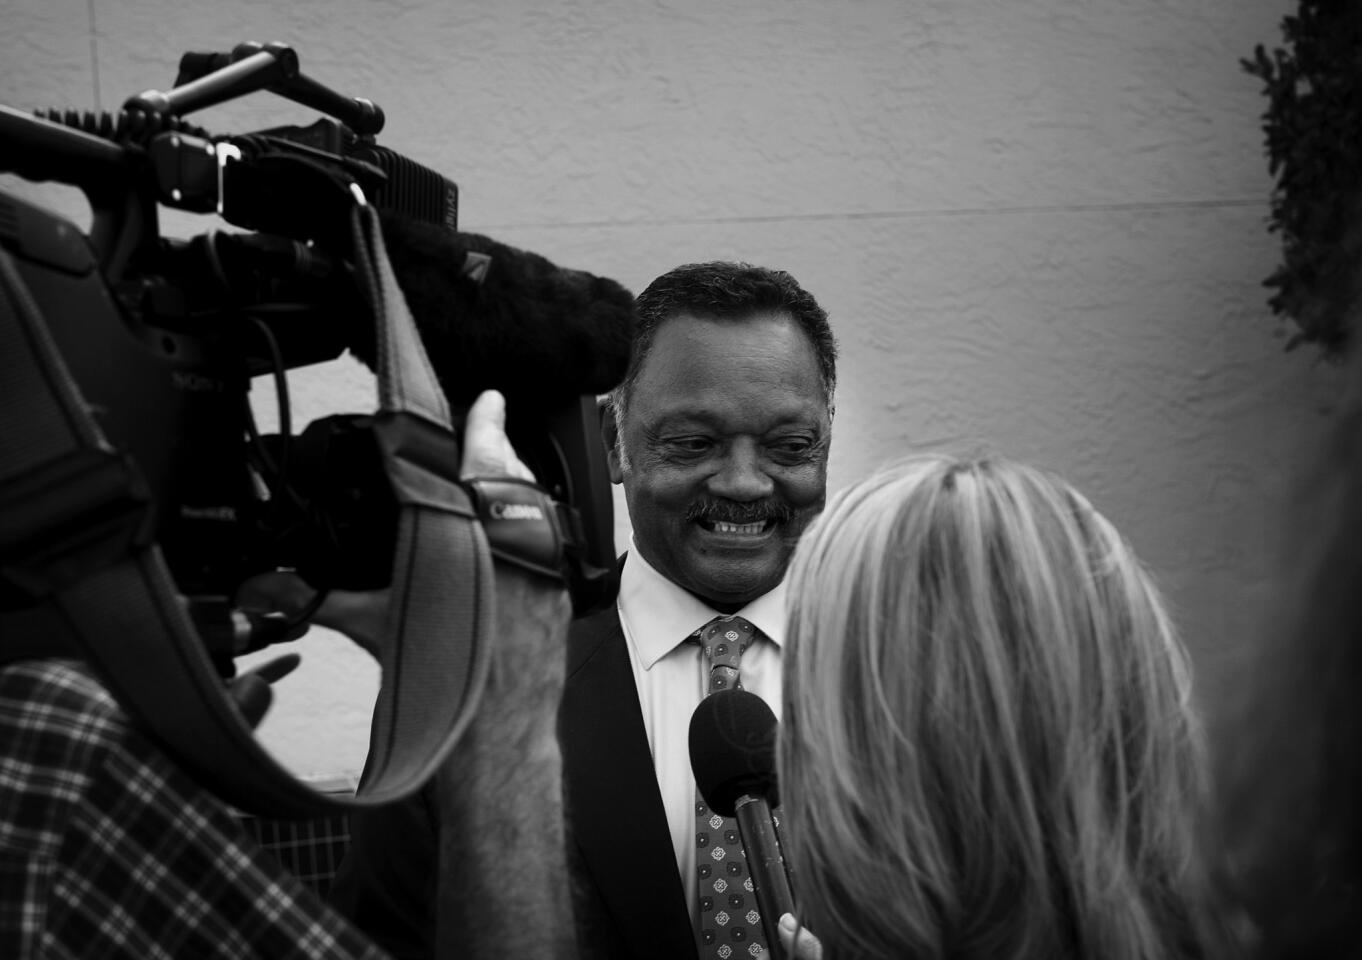 Jesse Jackson speaks to reporters outside of Macedonia Missionary Baptist Church in Eatonville on March 25, 2012. Jackson spoke to the congregation about Trayvon Martin and other topics during his hour long sermon.